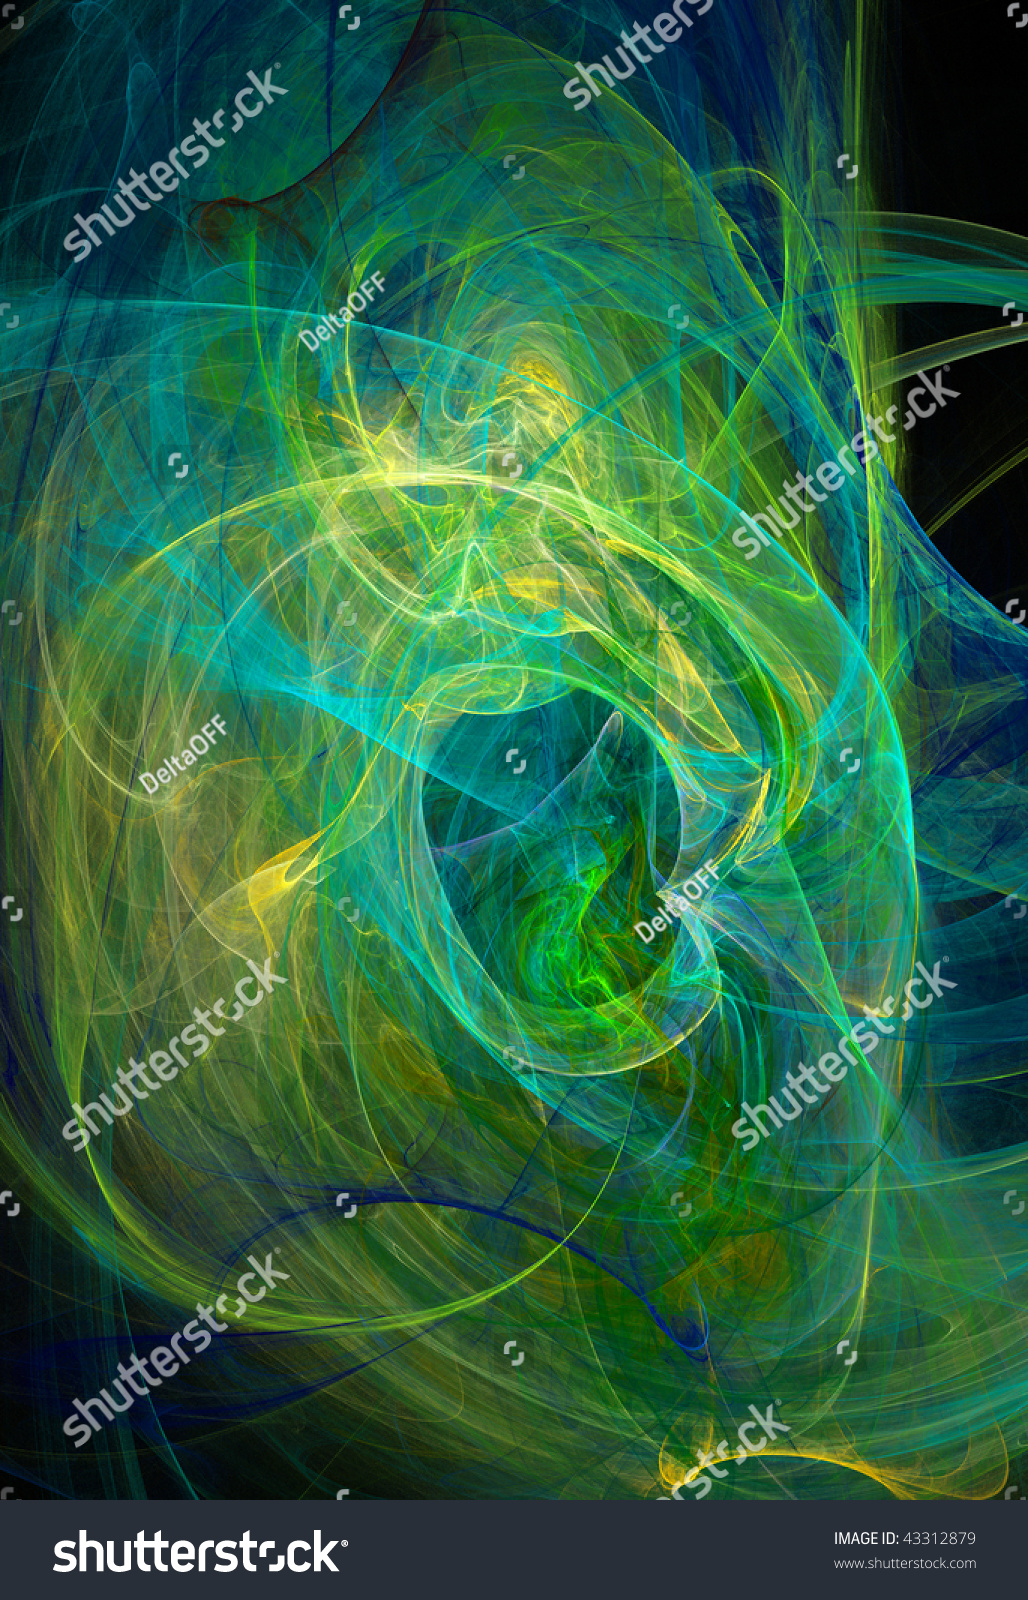 Edit Vectors Free Online - abstract background | Shutterstock Editor